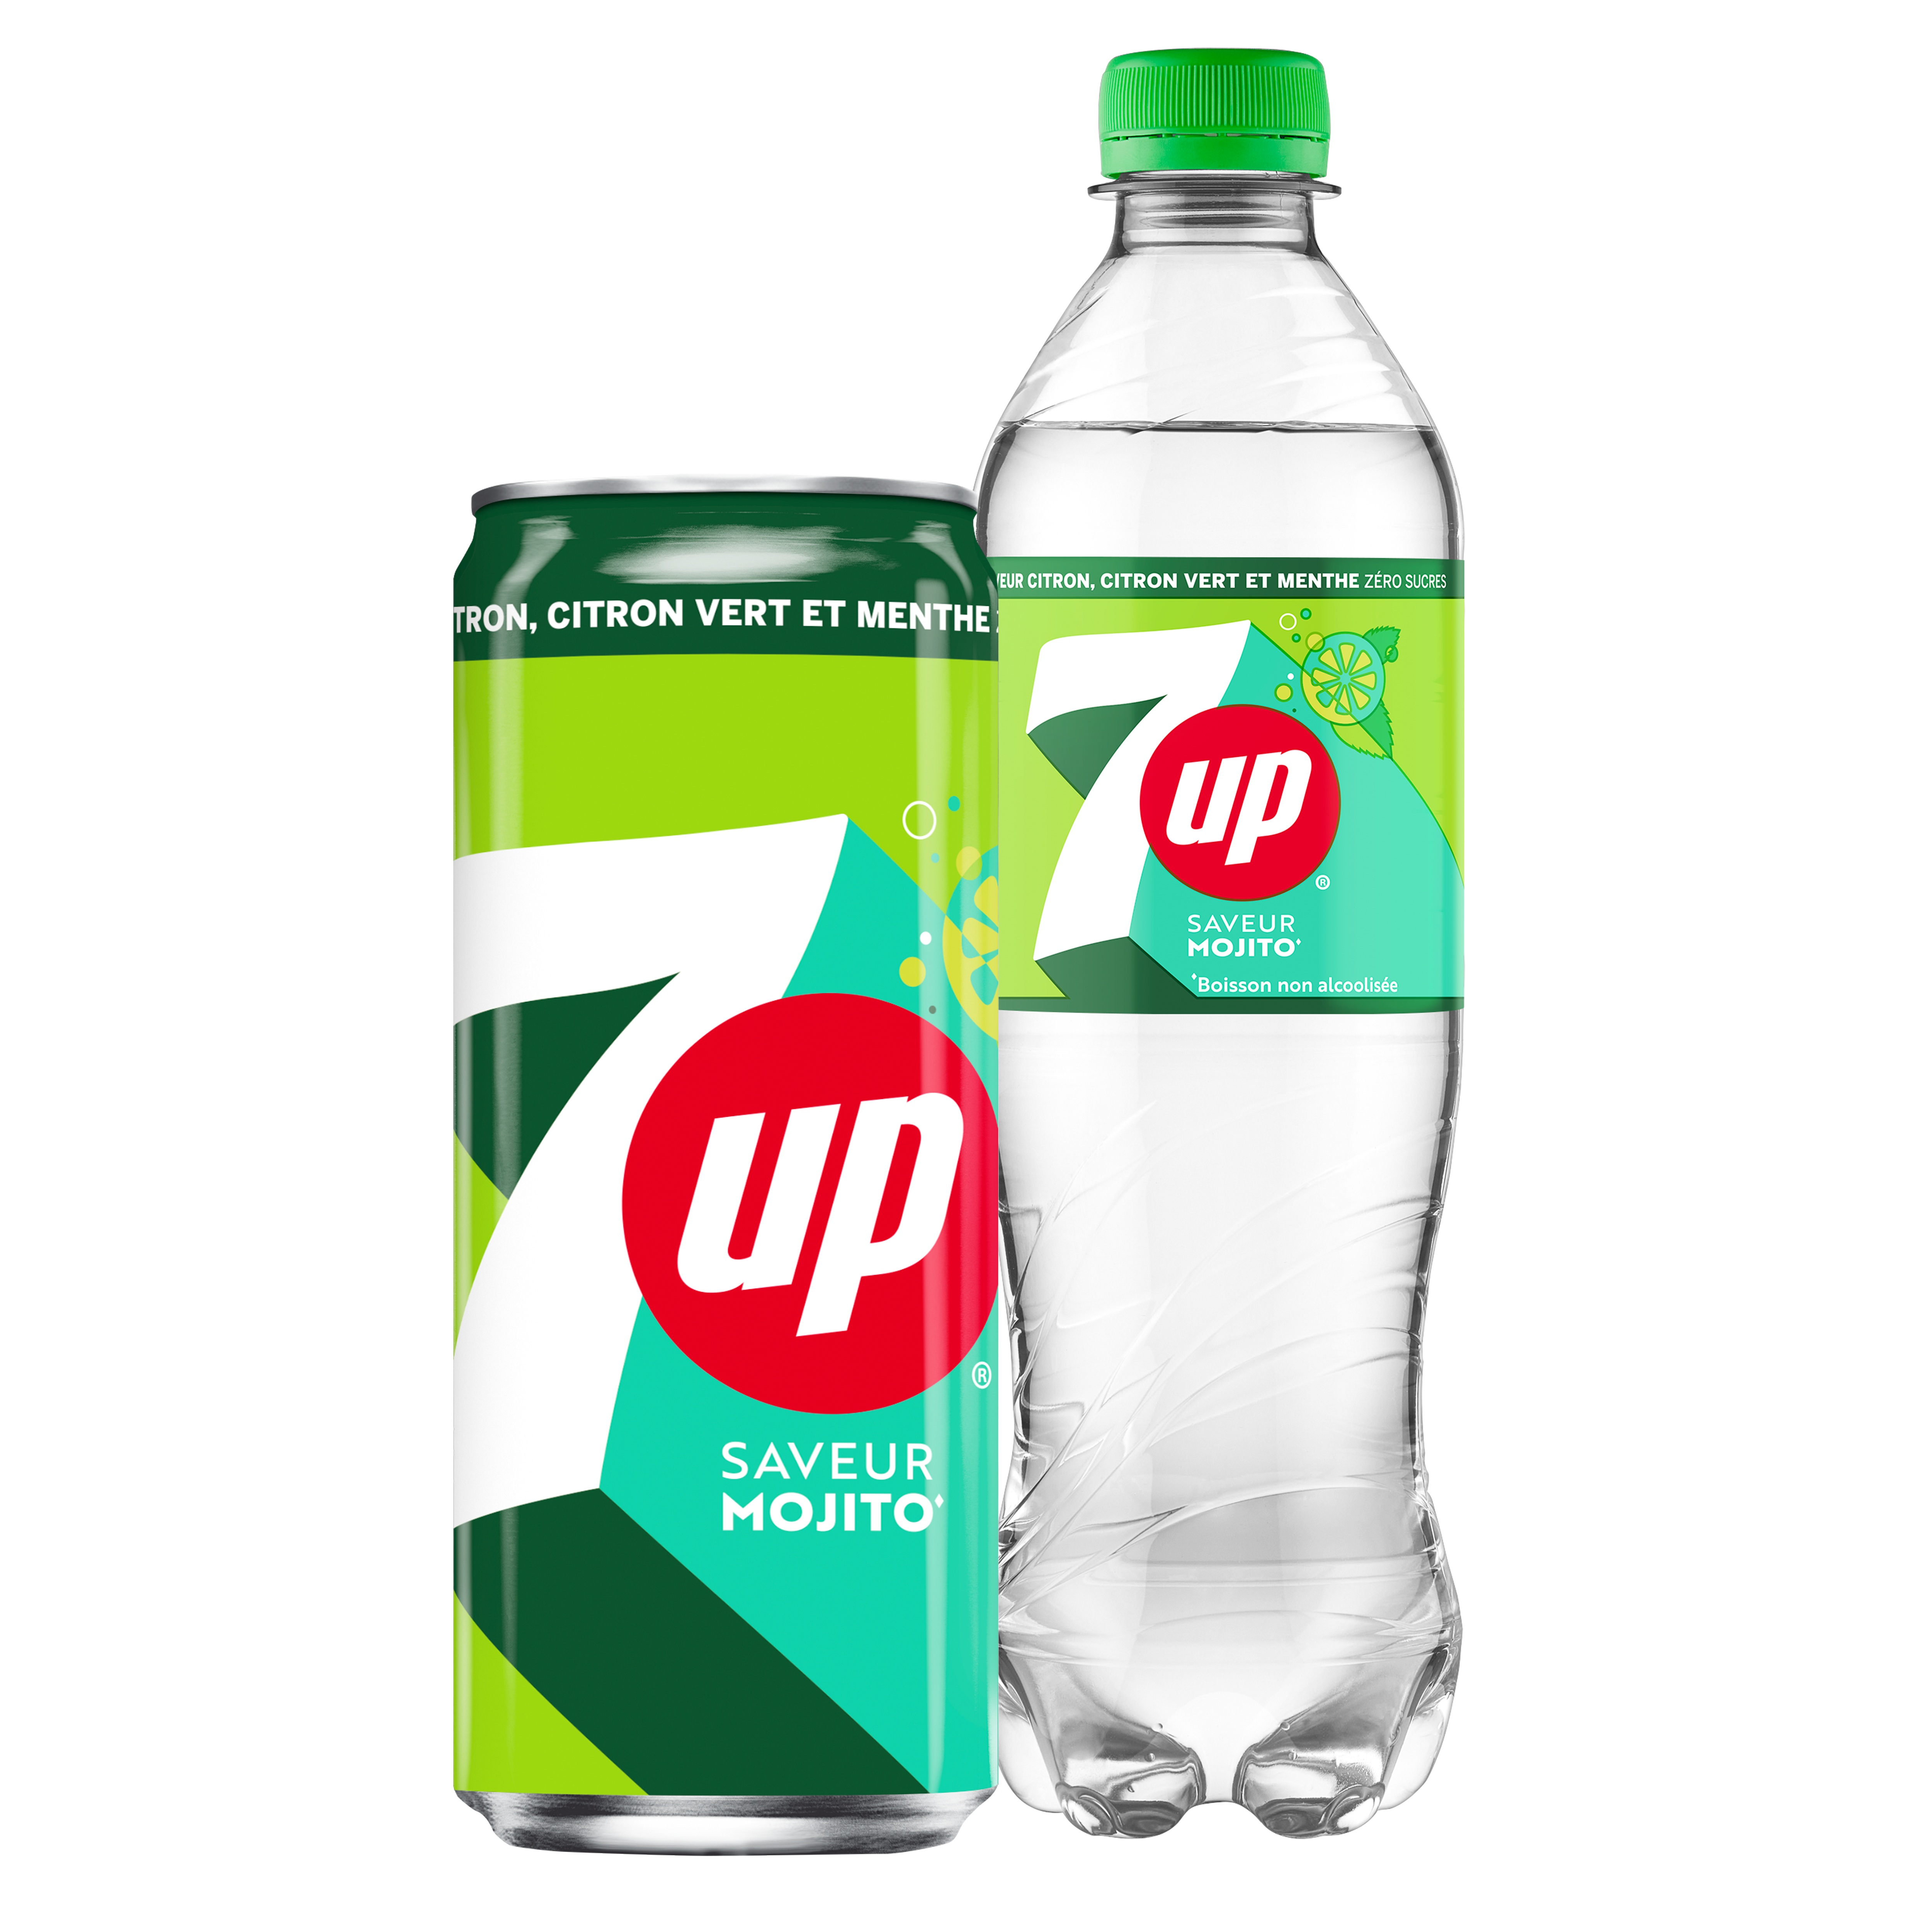 7up mohito pet+can